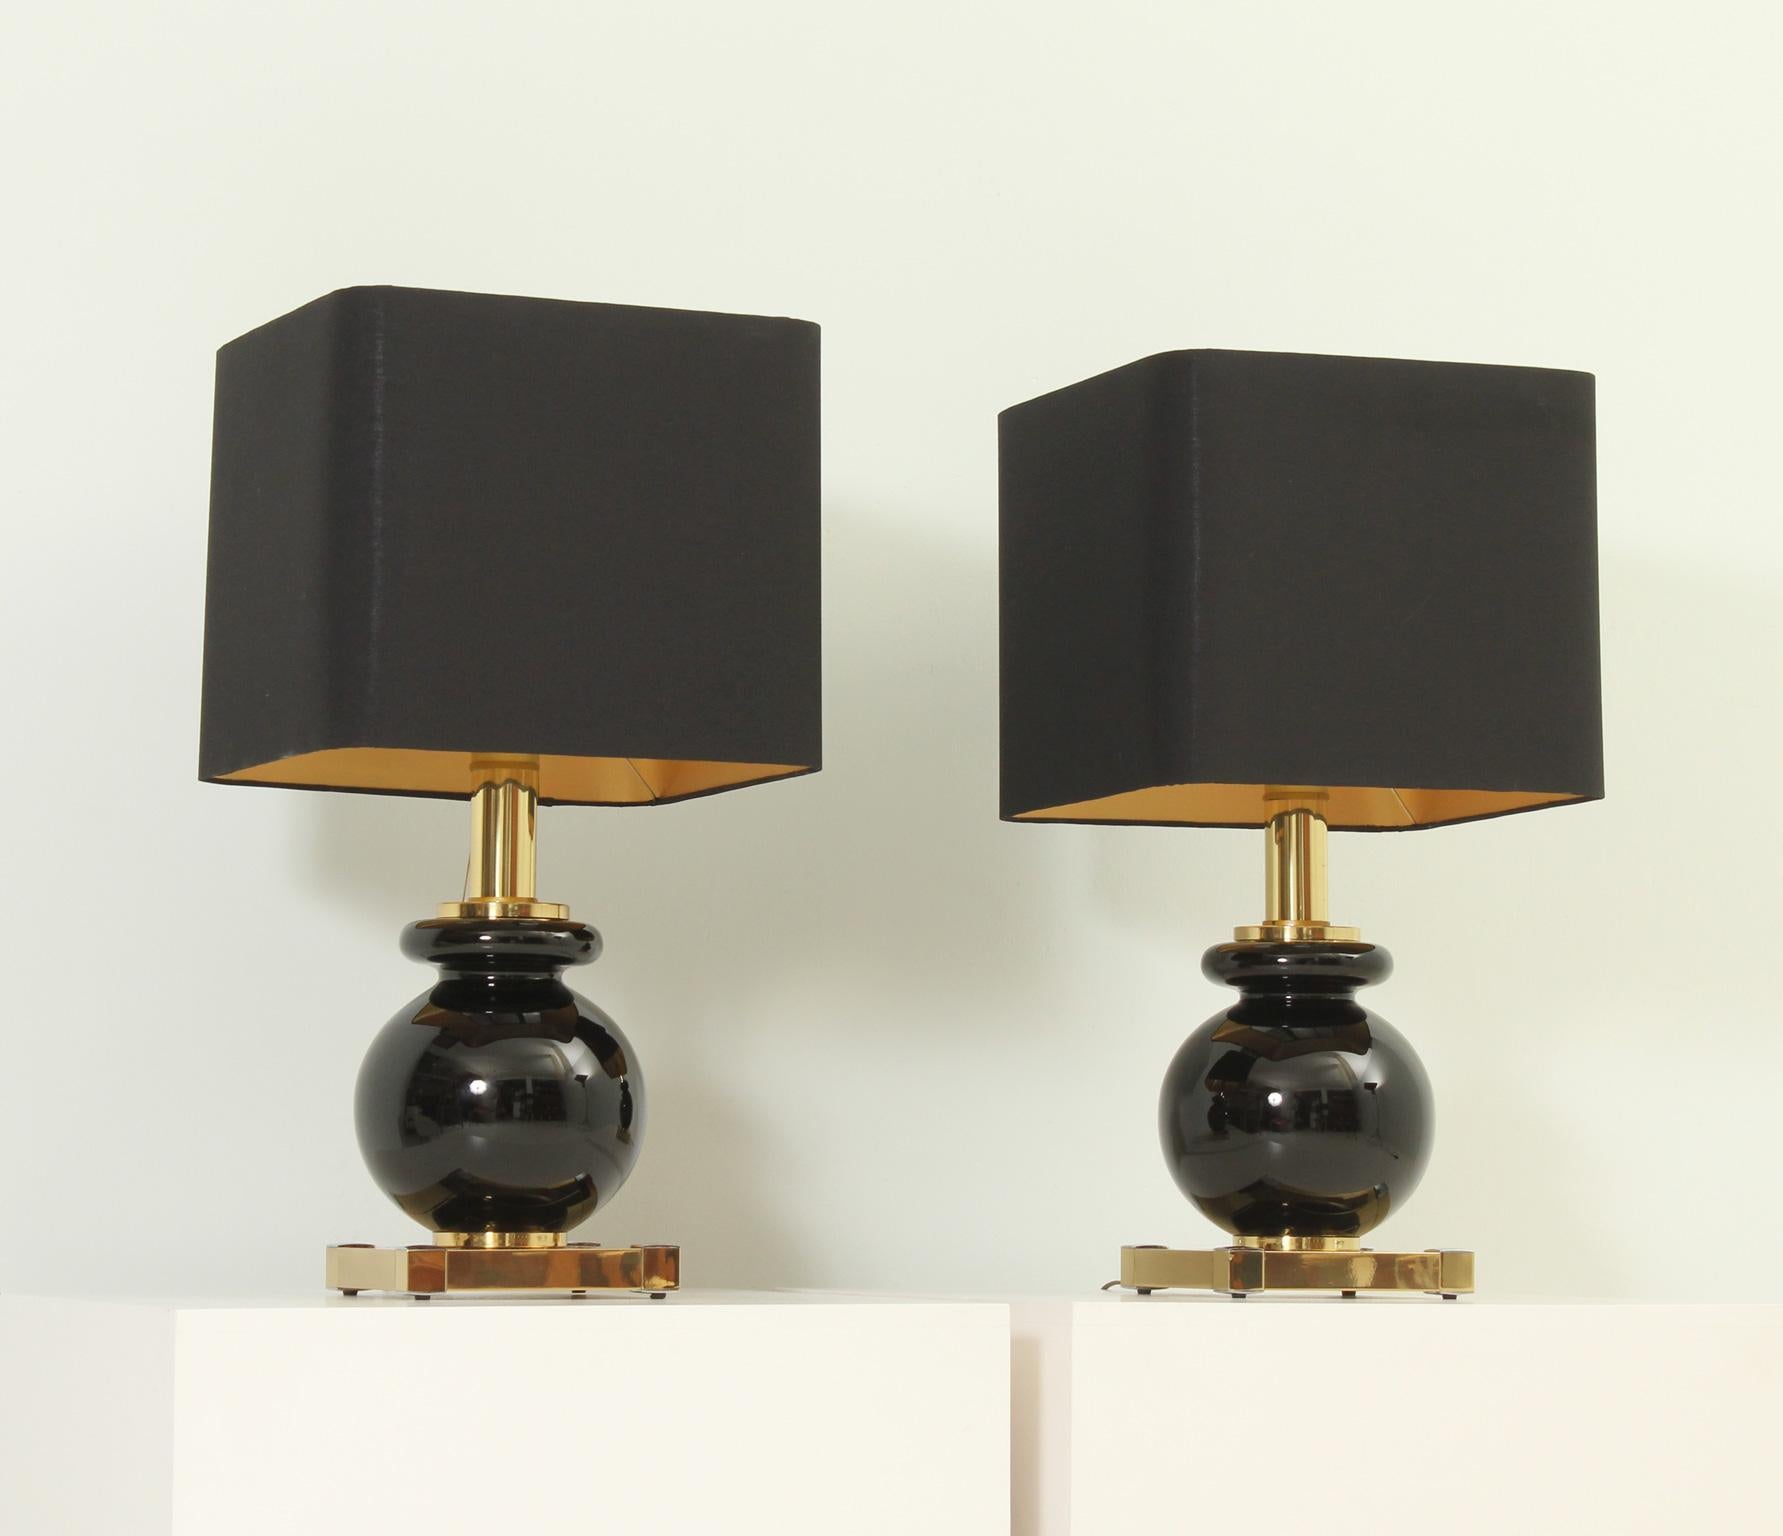 Pair of Lumica Table Lamps in Brass and Glass, Spain, 1970's For Sale 3